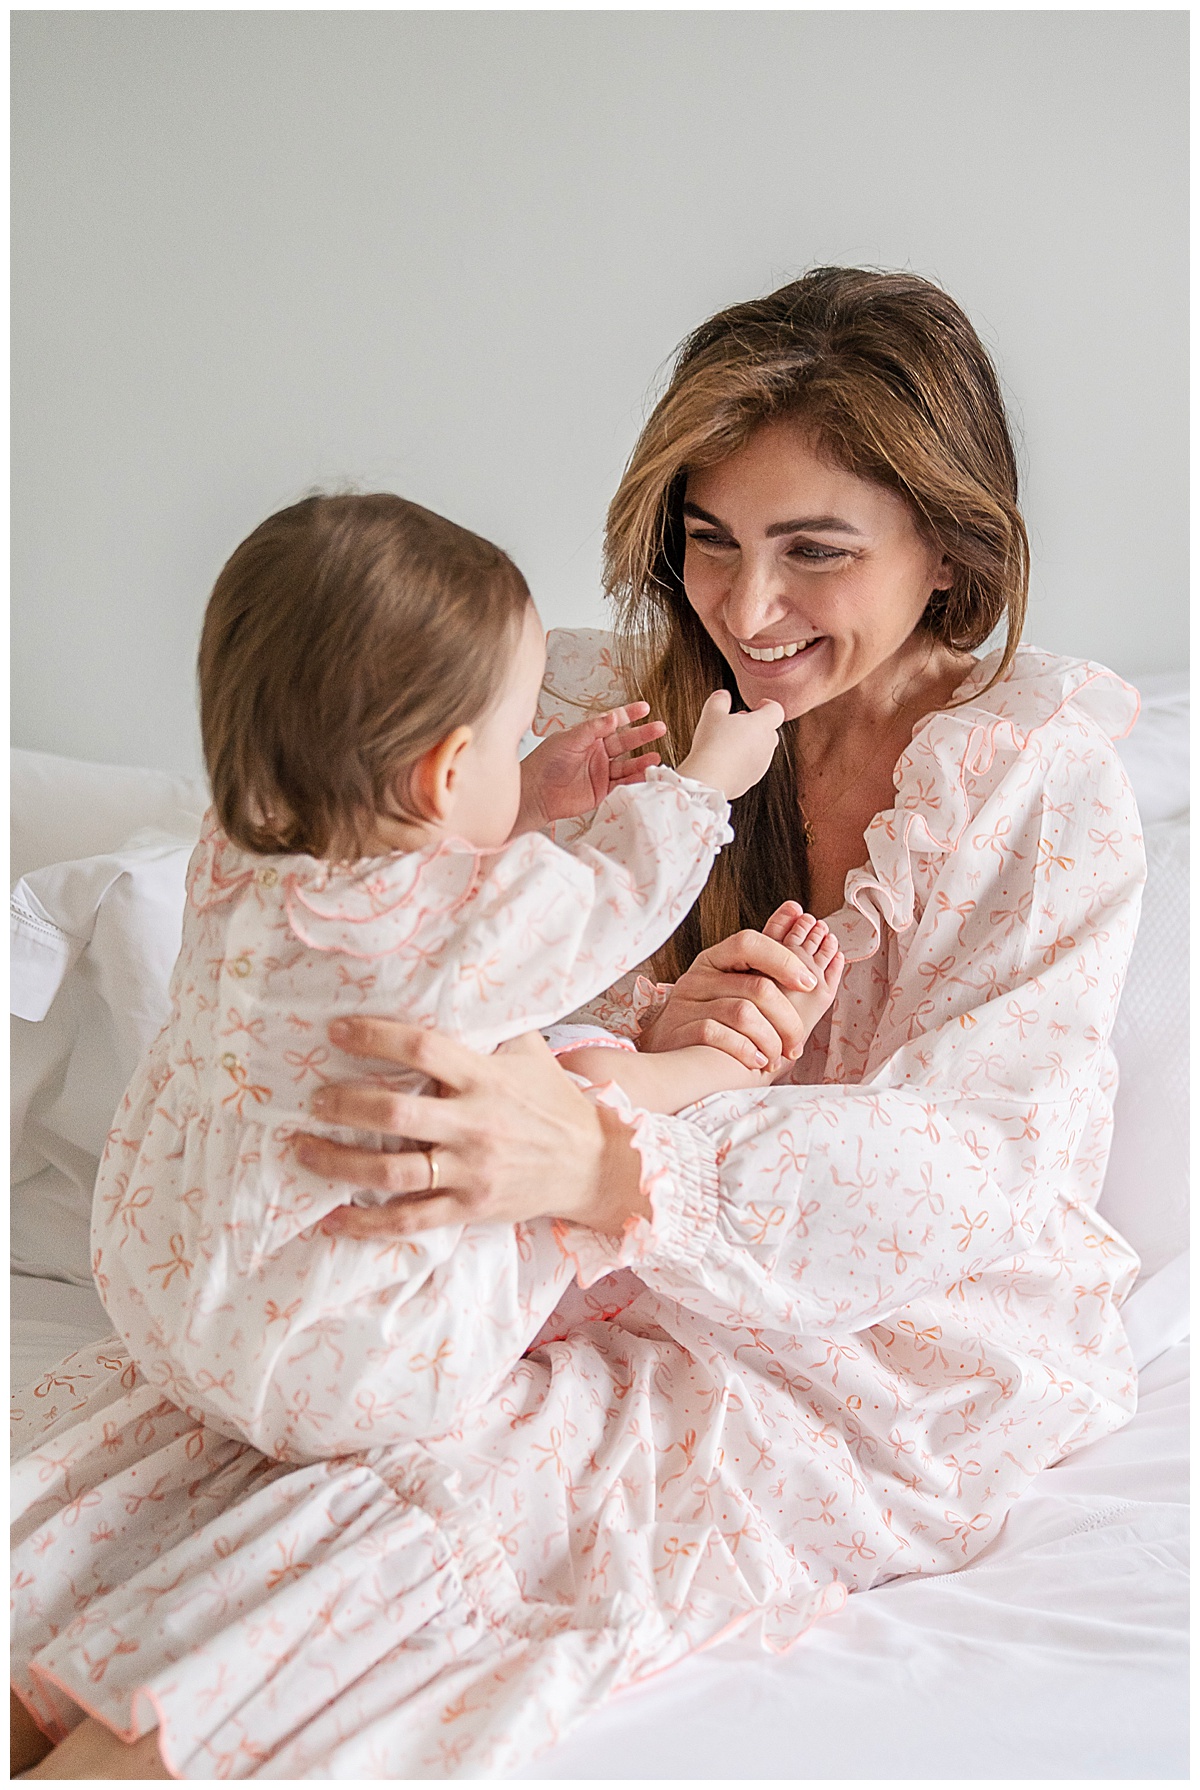 A mother wearing a beautiful printed nightdress plays with her baby daughter who wears a matching romper.